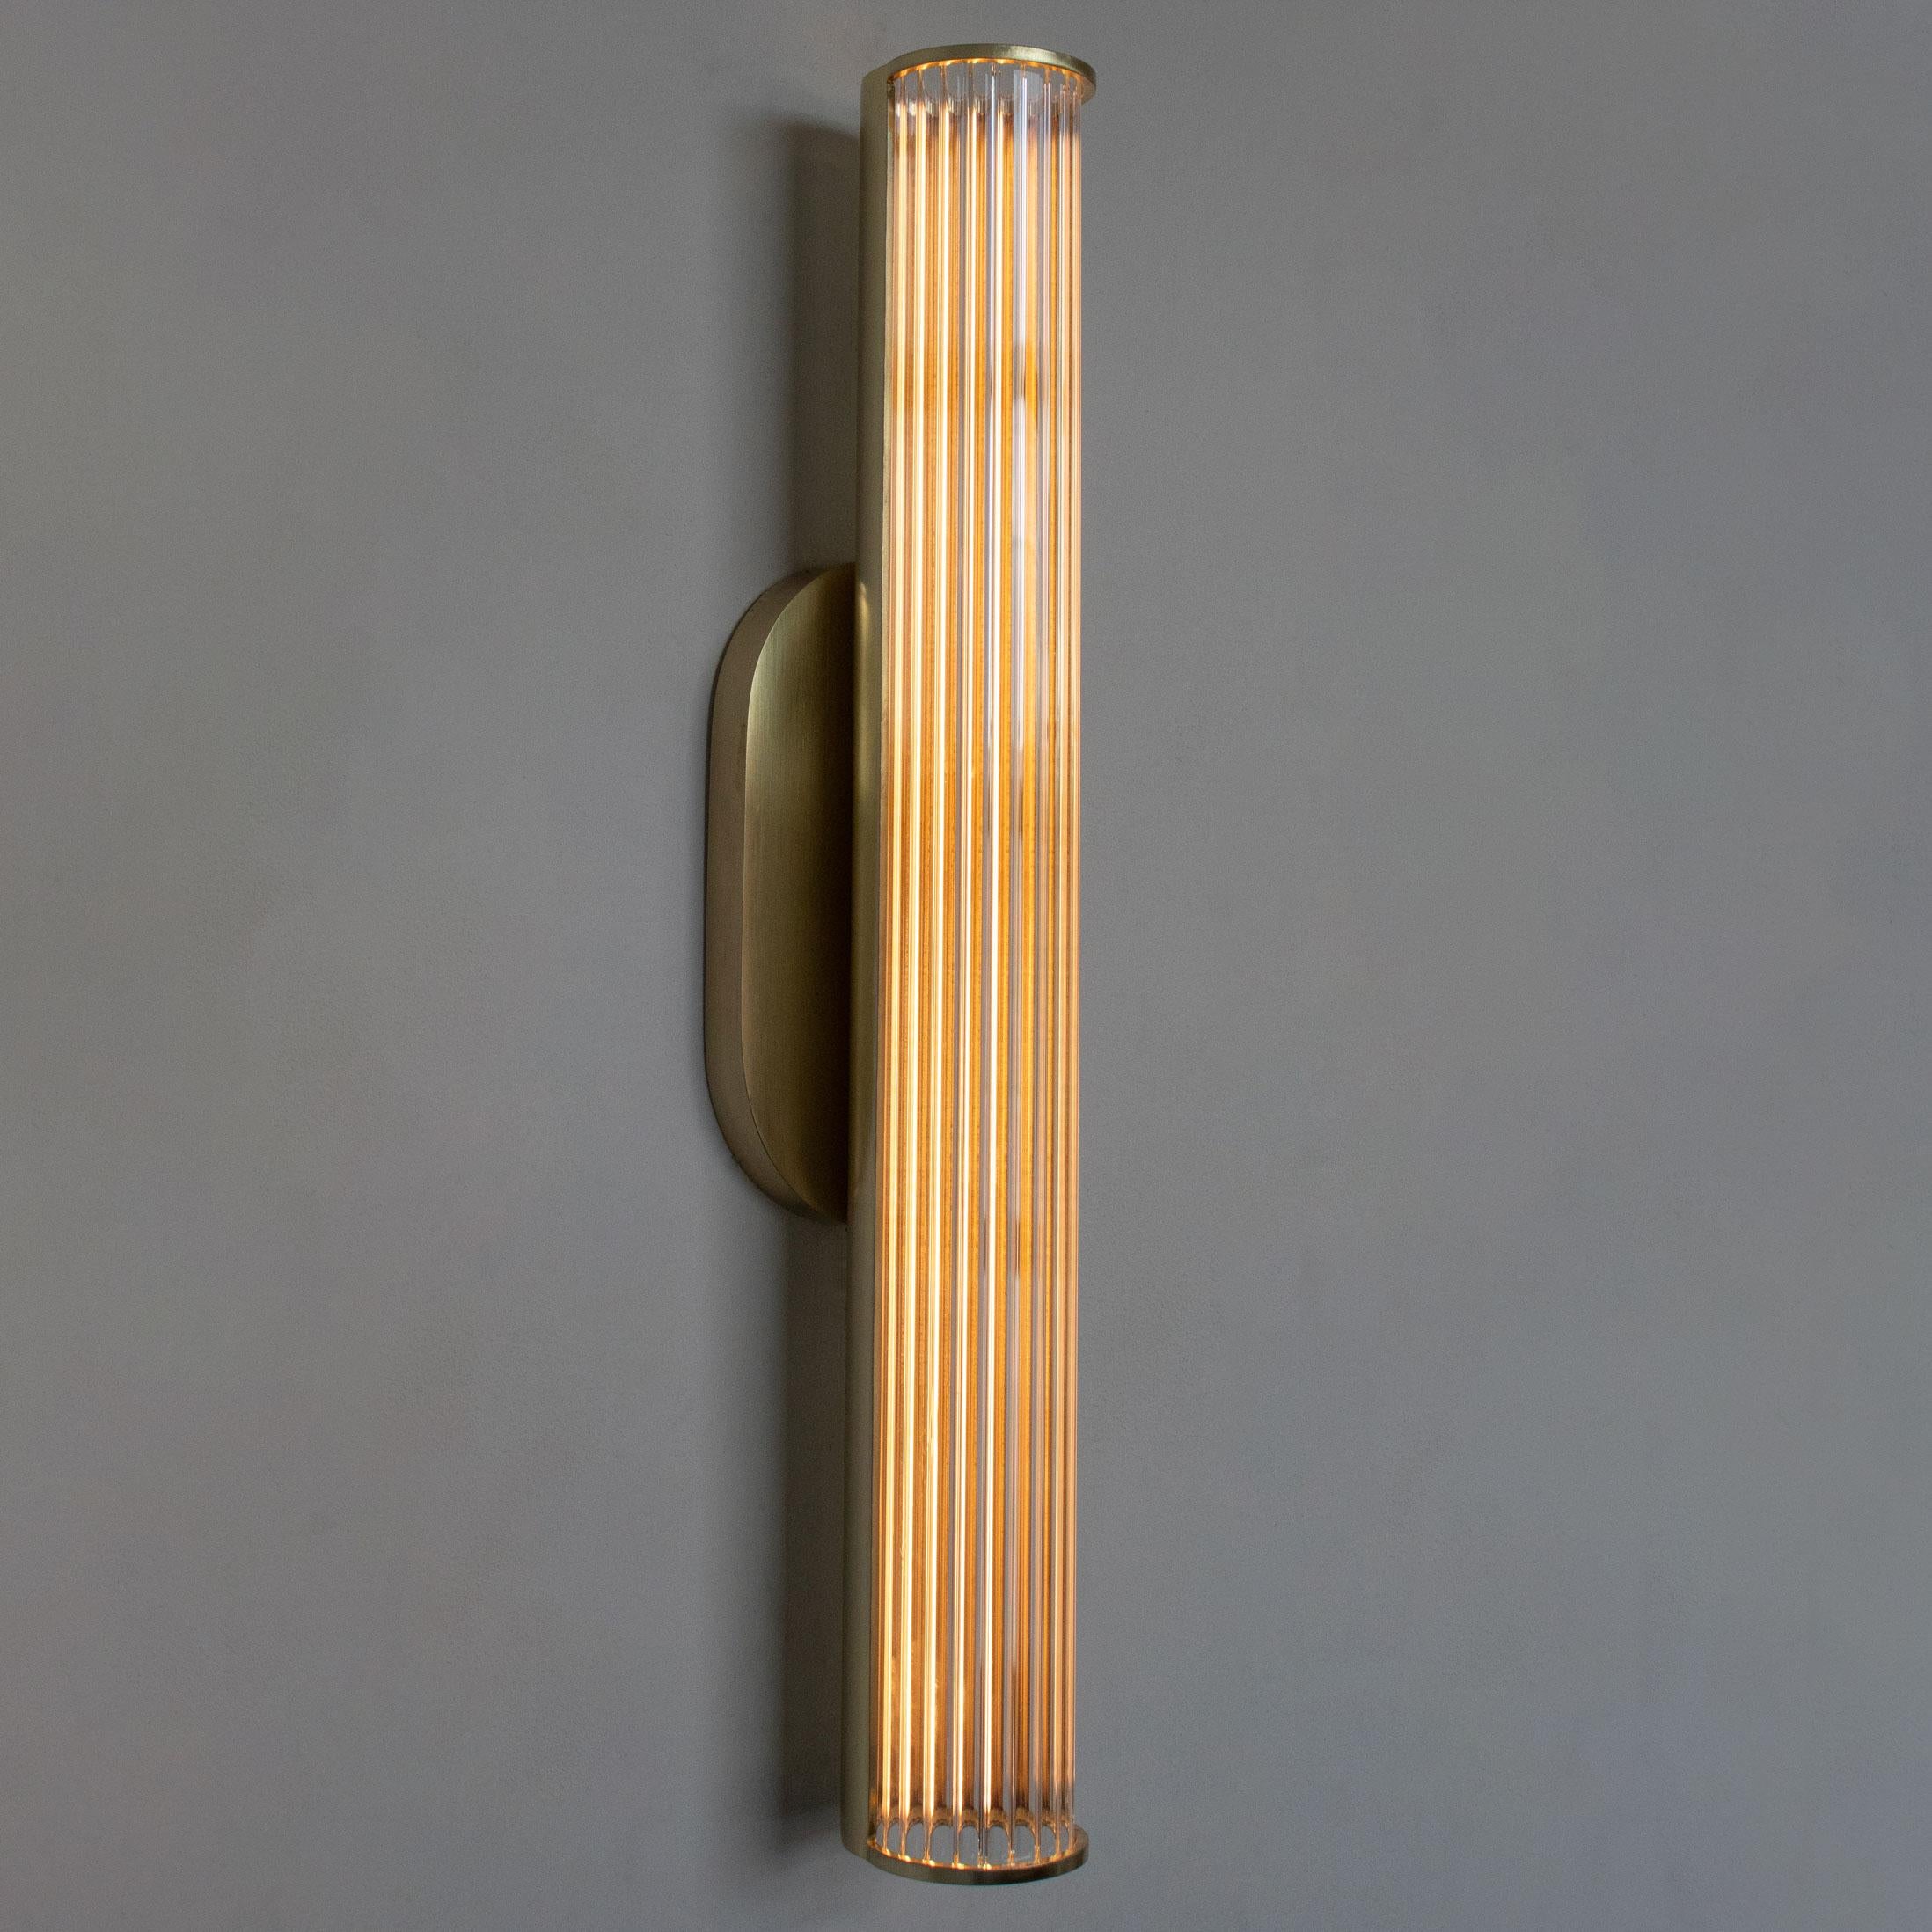 EMBER S2 Wall Sconce - 24 3/4 inch - Clear Scalloped Glass - Satin Brass In New Condition For Sale In Toronto, CA